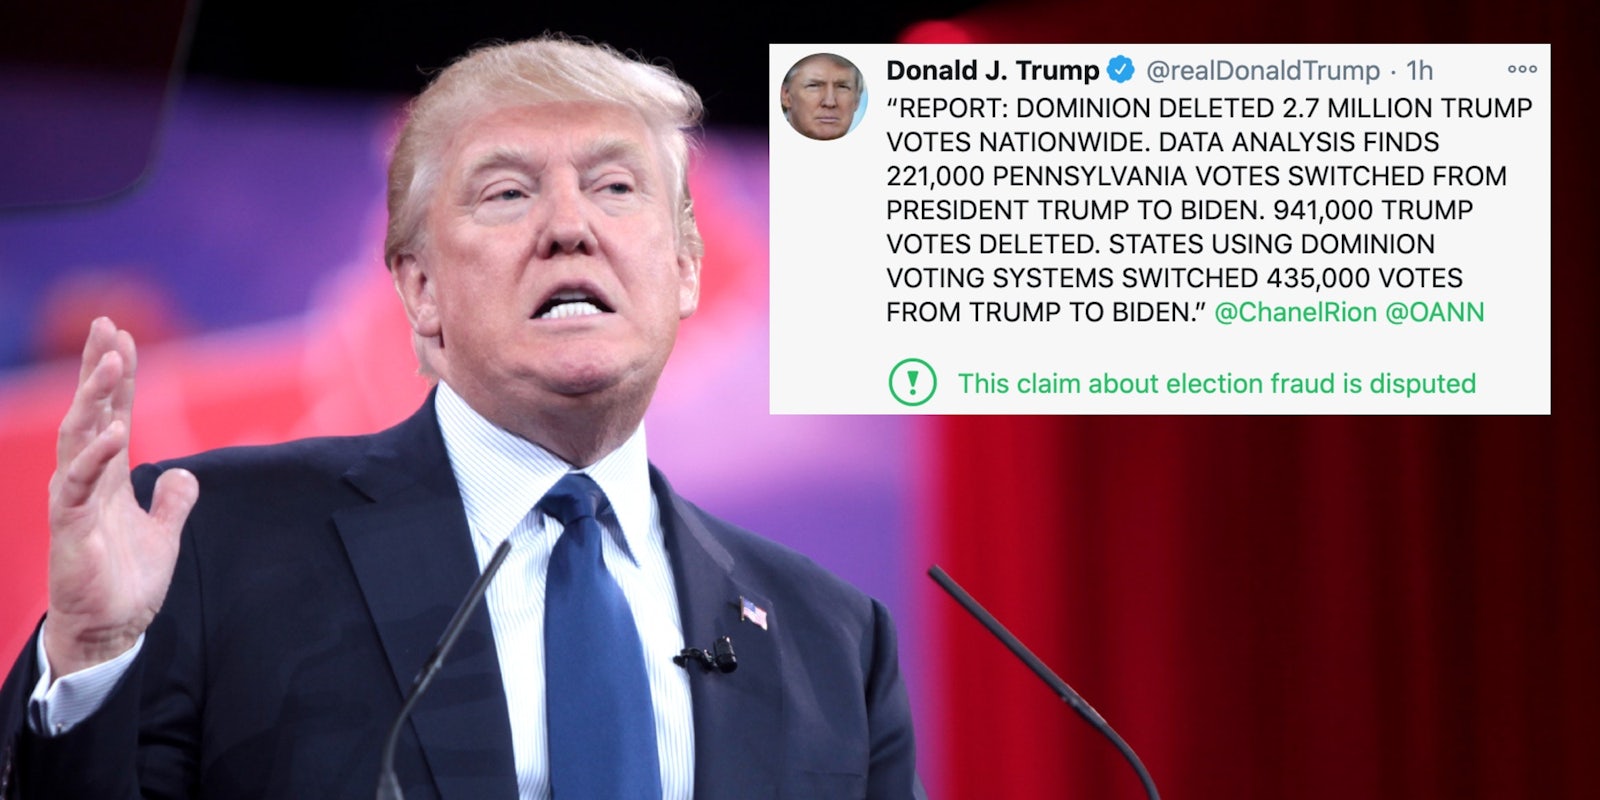 President Donald Trump next to a false tweet about election fraud